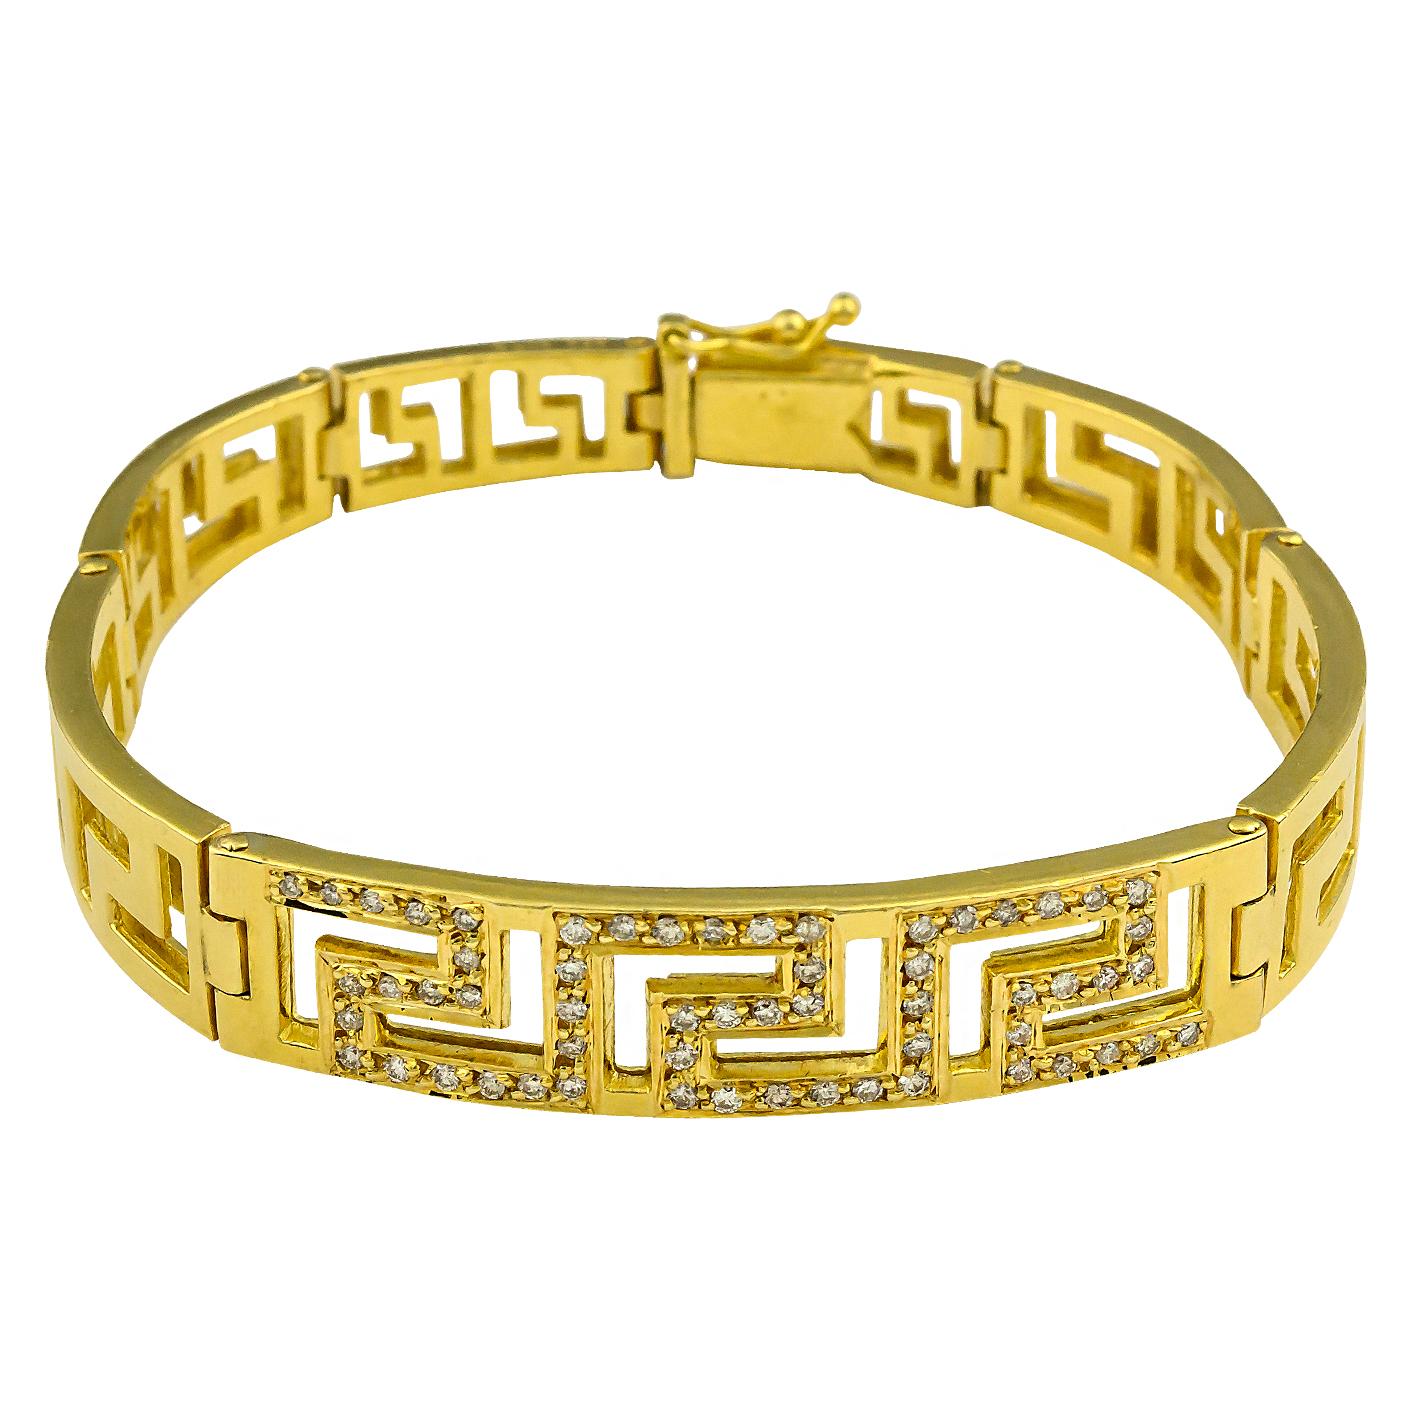 Georgios Collections 18 Karat Gold Diamond Classic Greek Key Design Bracelet In New Condition For Sale In Astoria, NY